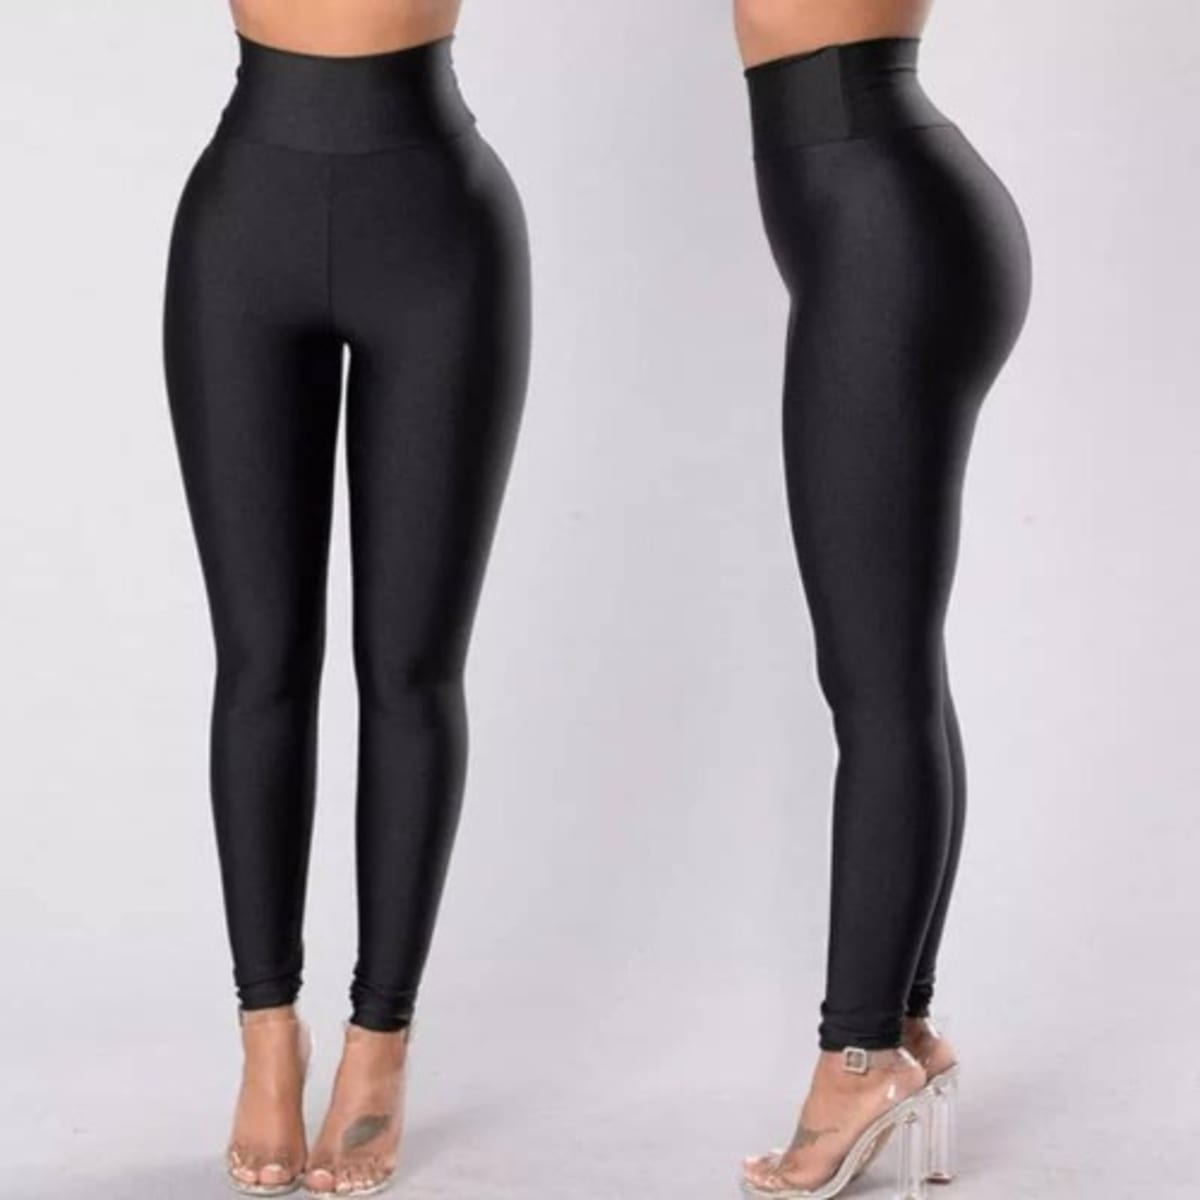 Women's Shiny Disco Leggings Combined with any shirt, blouse